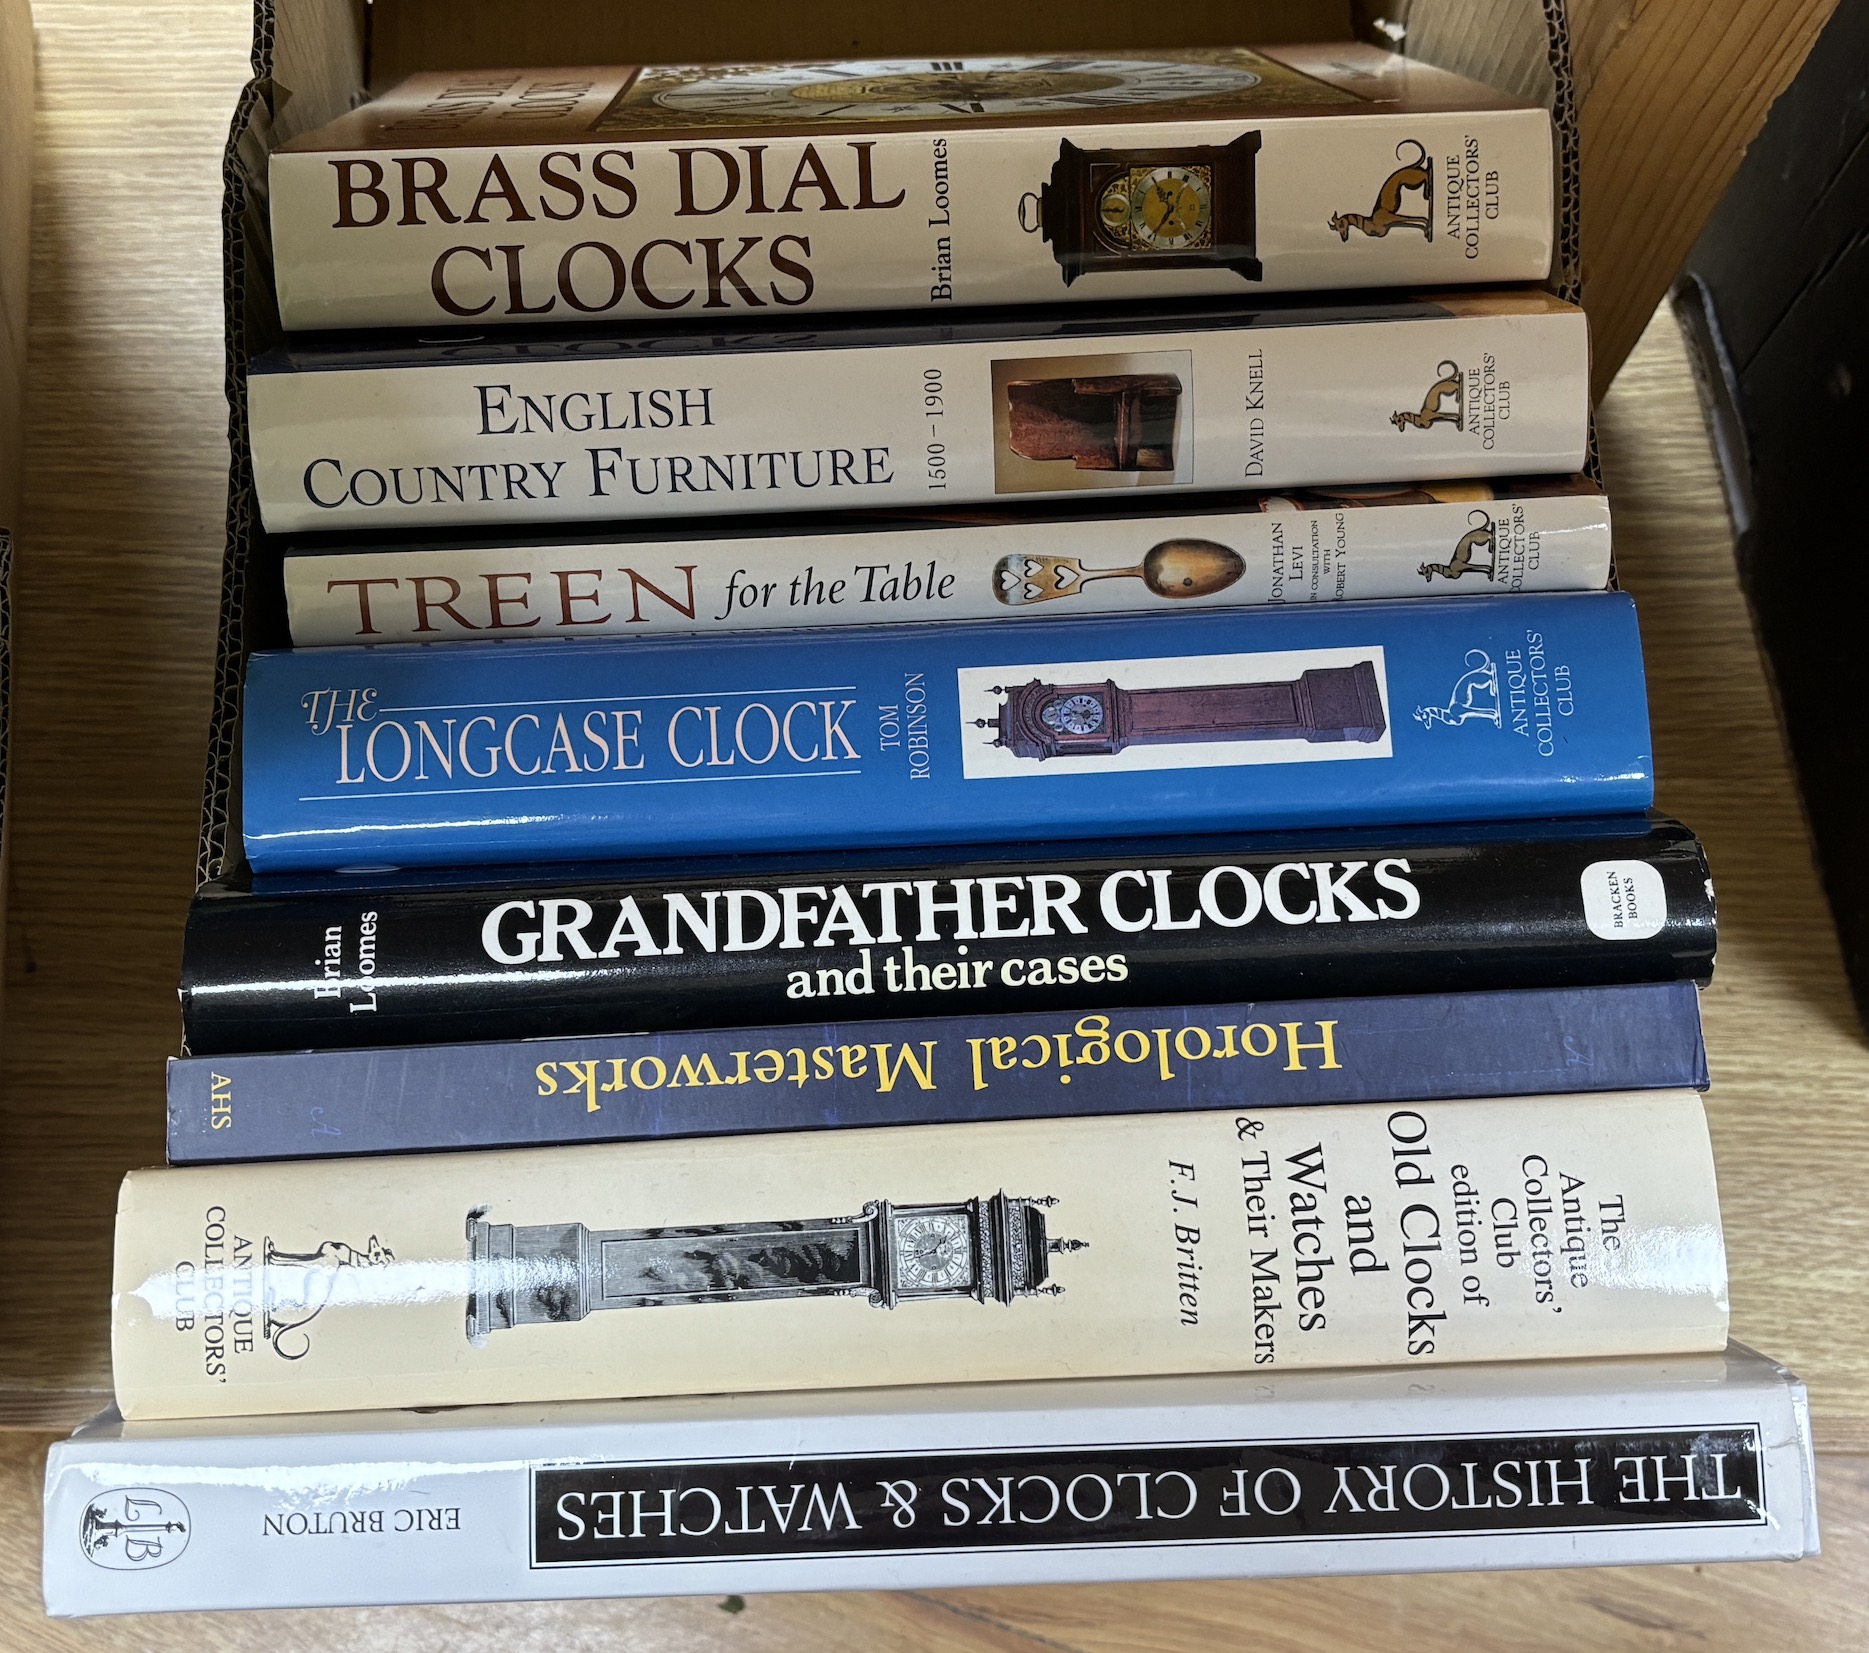 Eight Antique and Clock reference books, including; Brass Dial Clocks, The Longcase Clock, Grandfather Clocks, The History of Clocks and Watches, etc.                                                                      